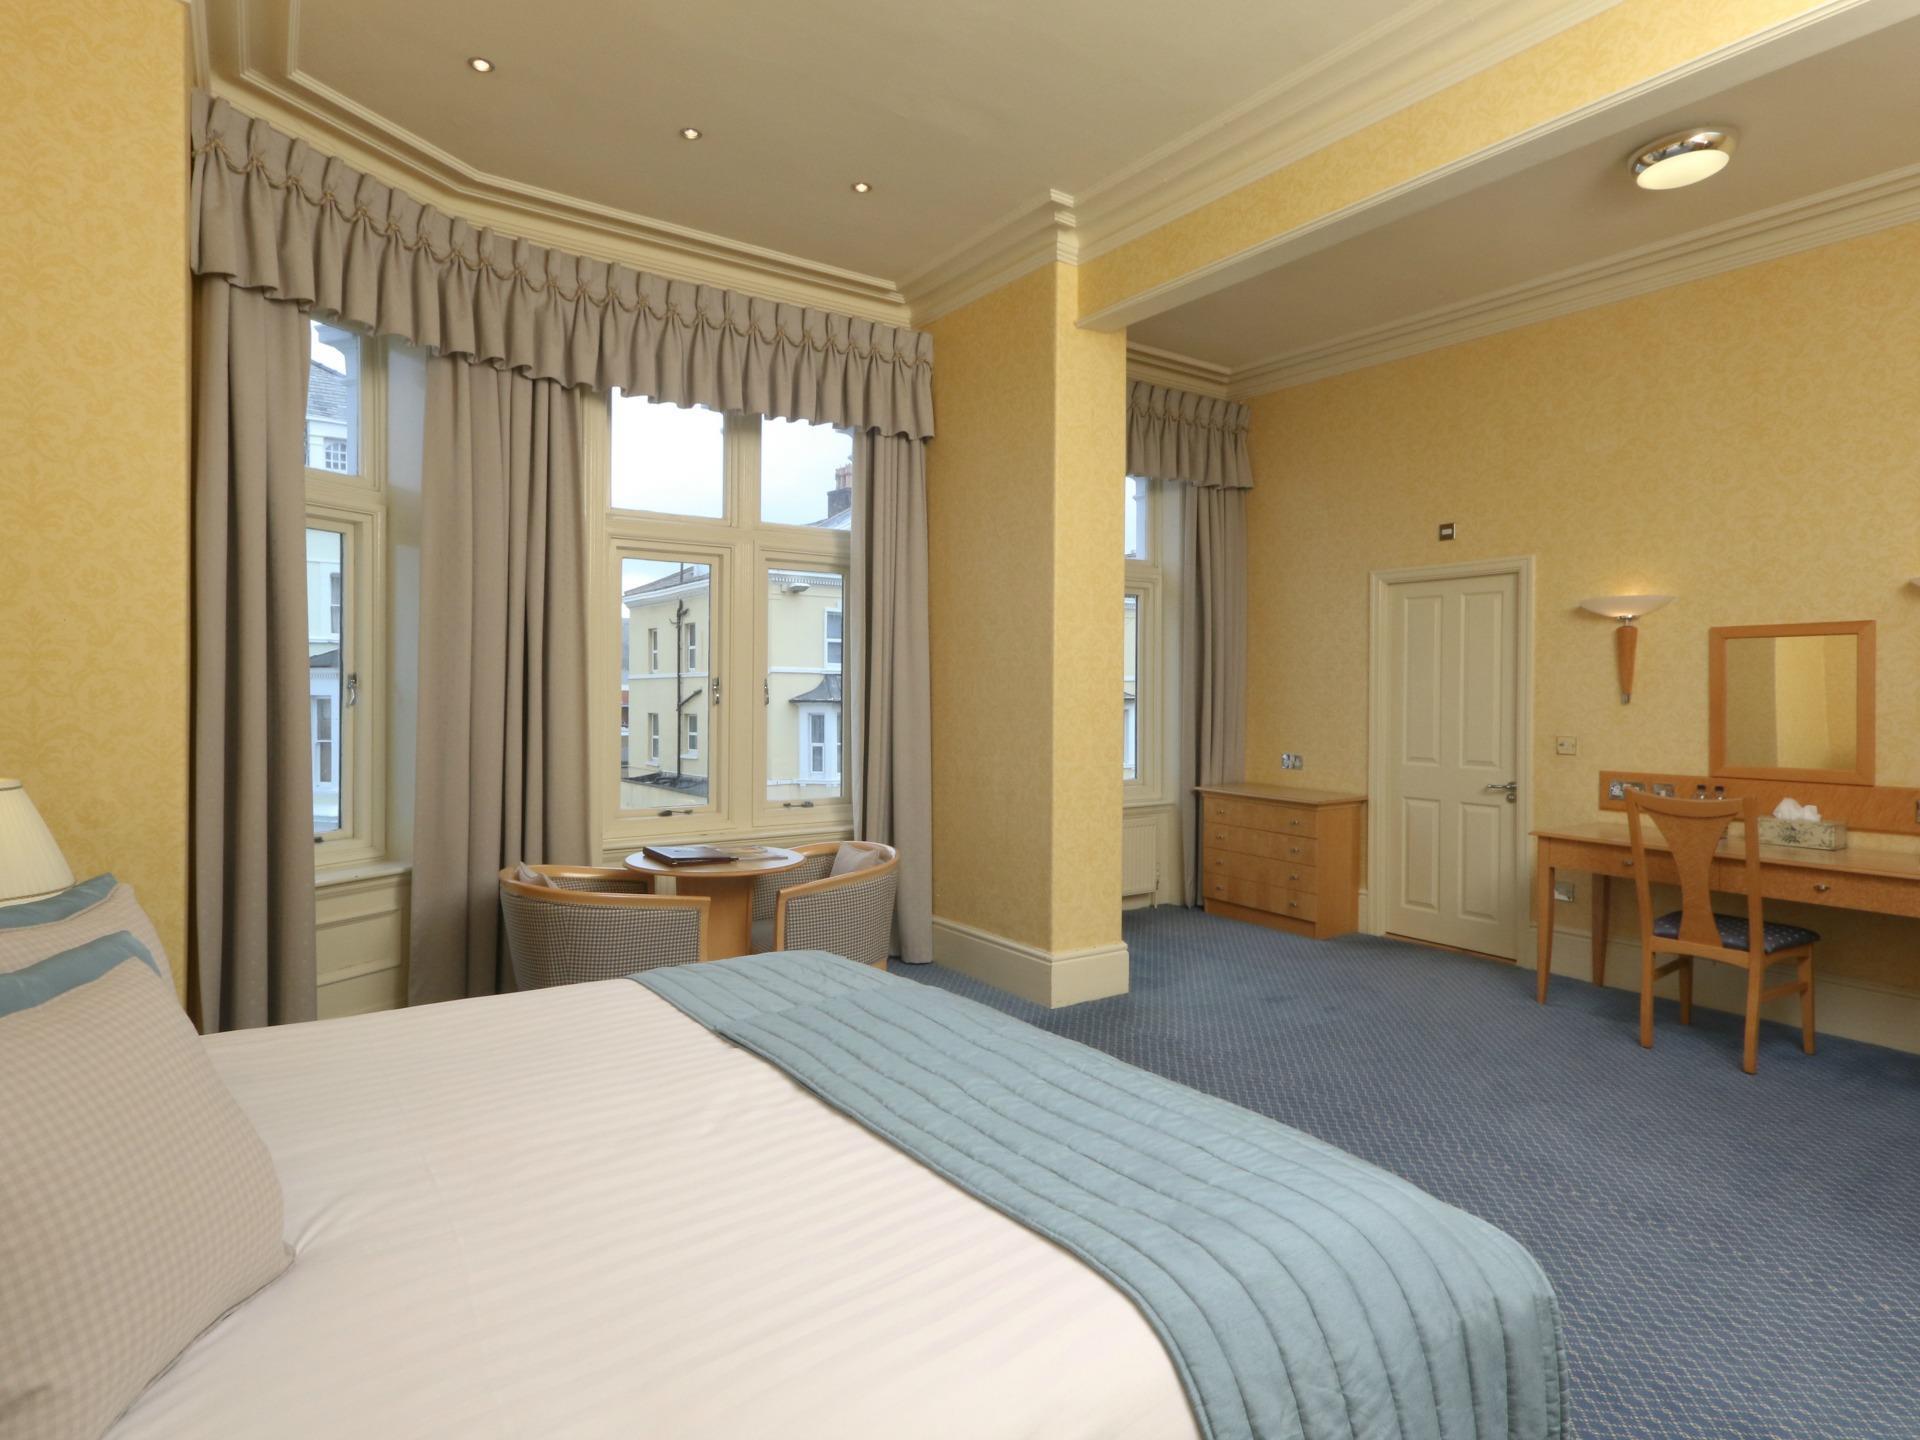 The Imperial has 98 spacious bedrooms